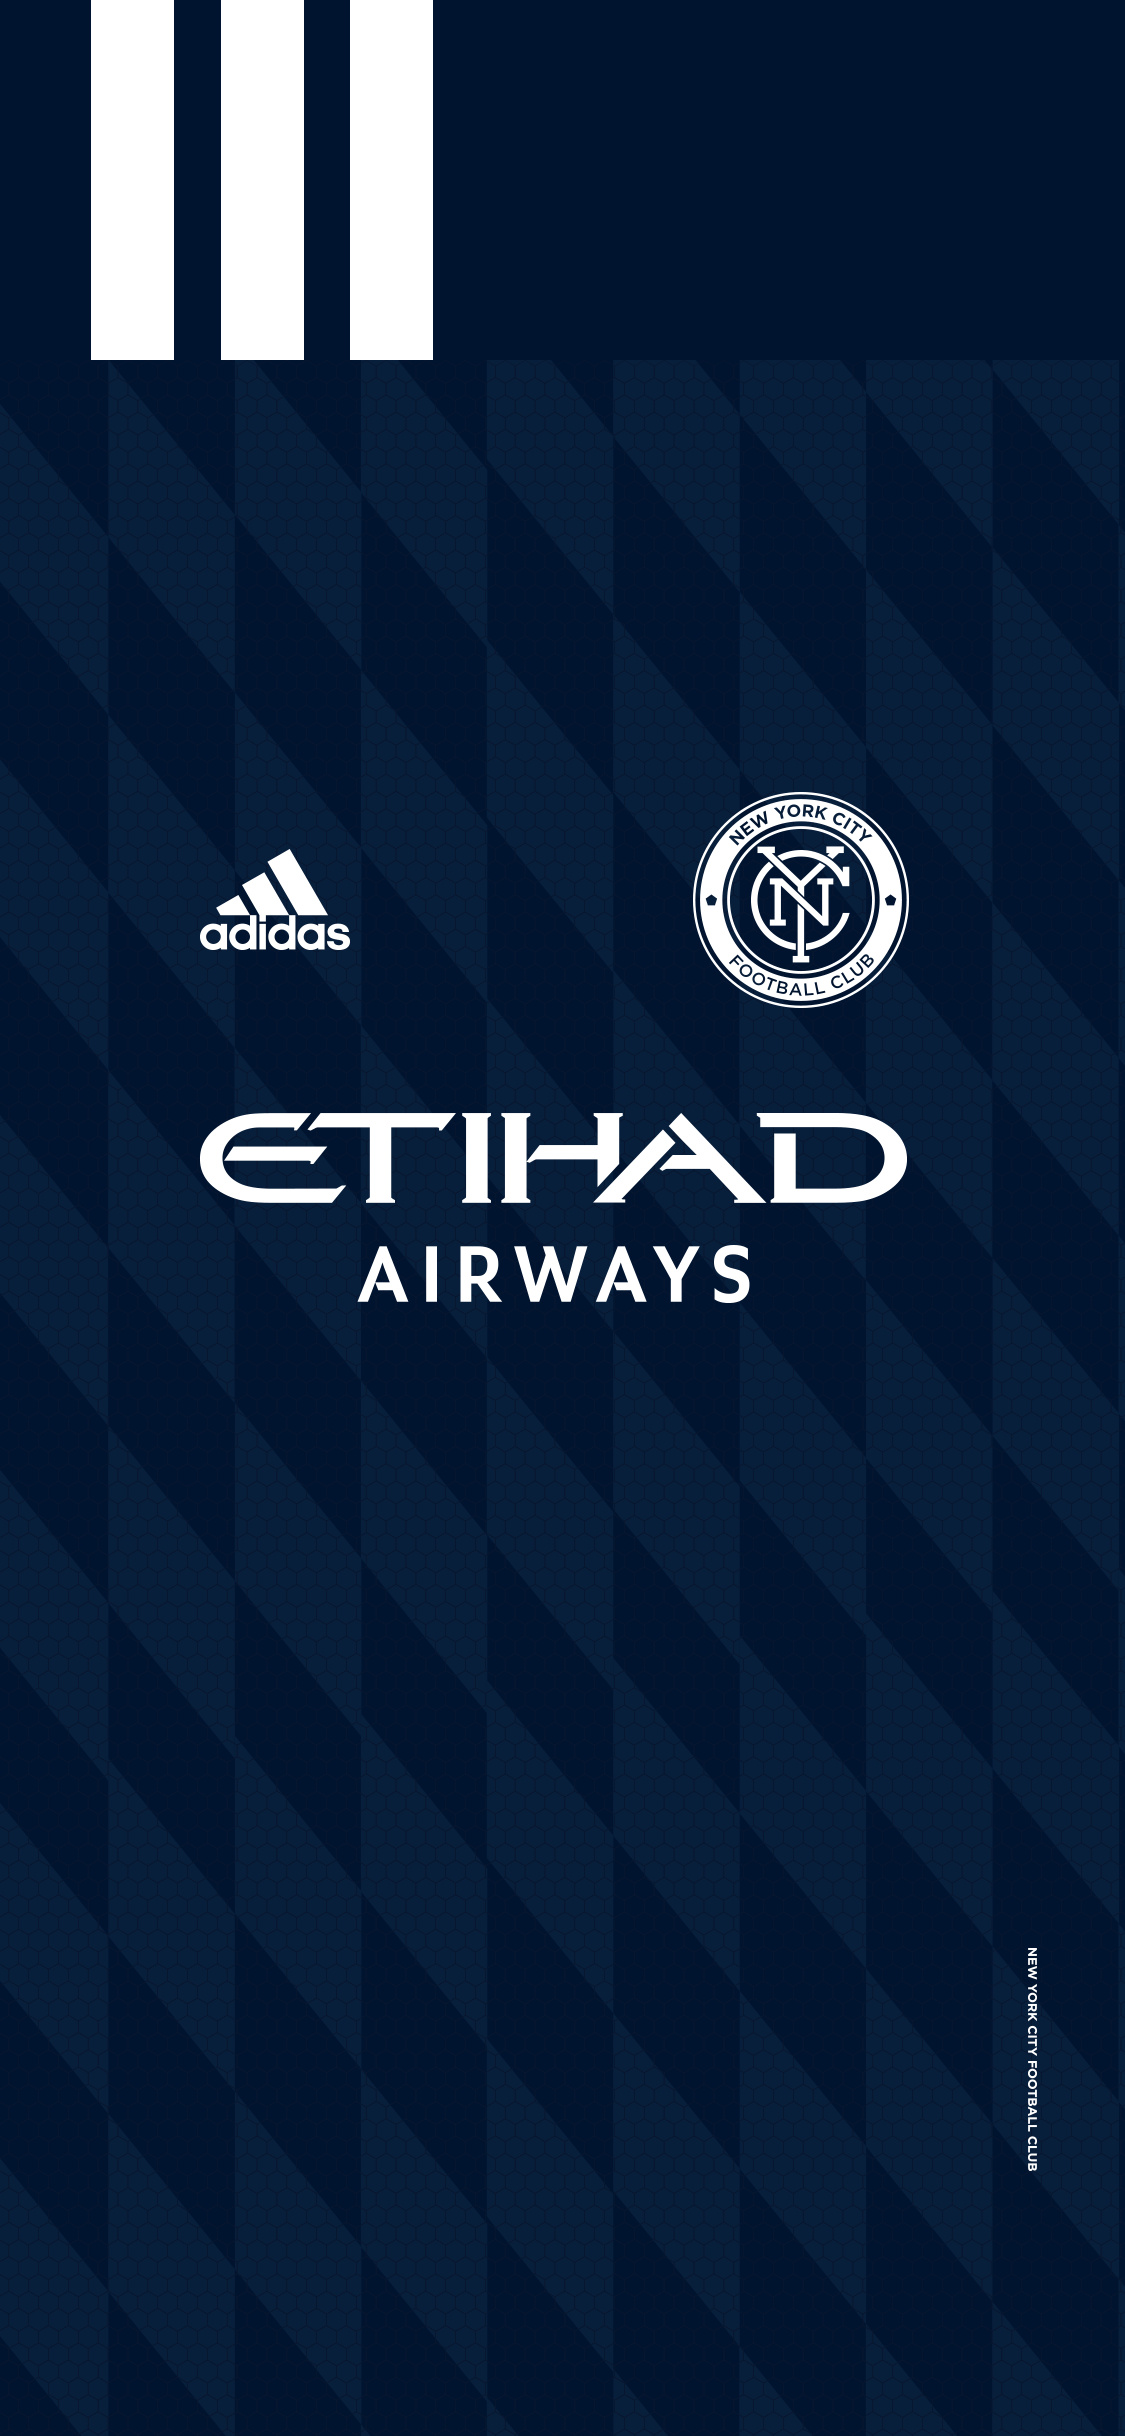 NYCFC wallpapers, Team pride, Soccer passion, Fan support, 1130x2440 HD Handy